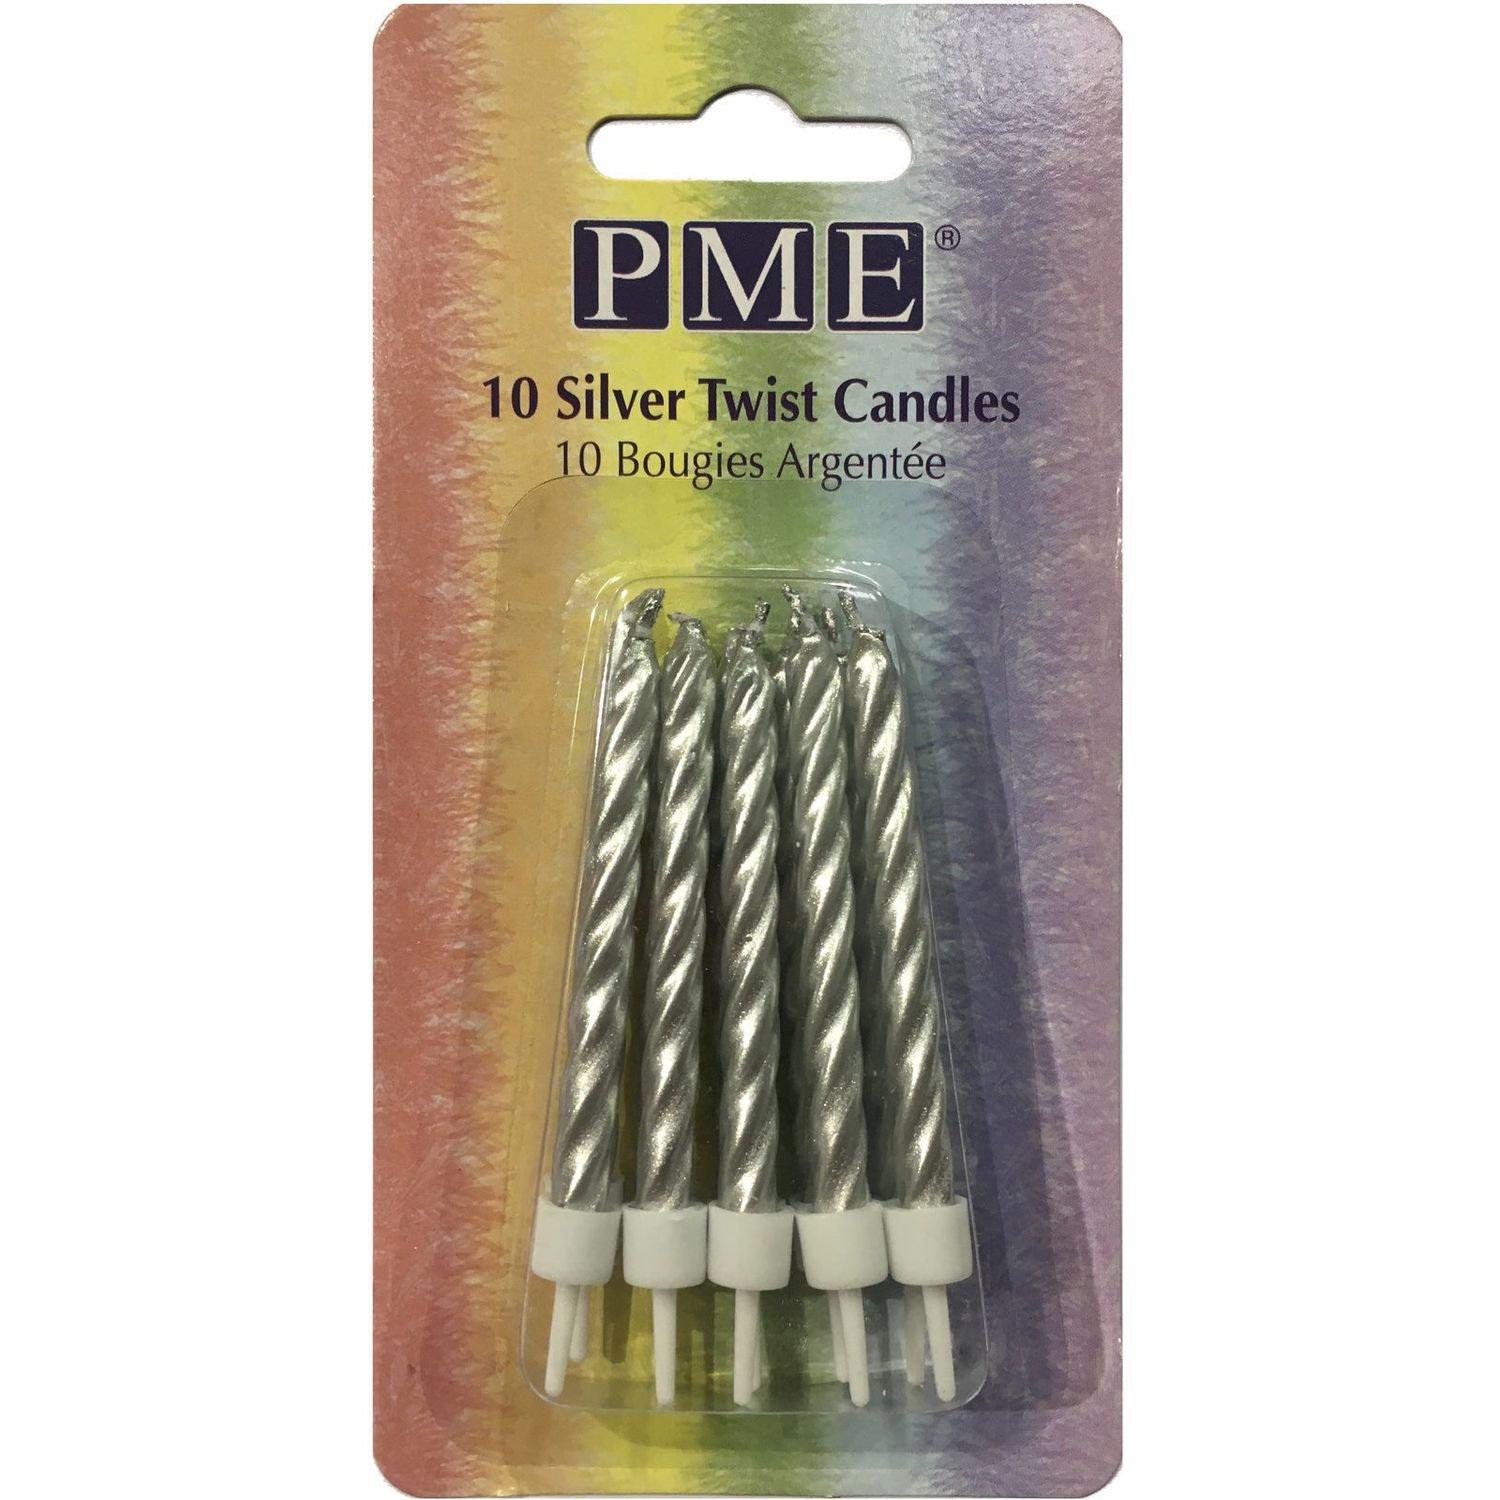 PME 10 Silver Twist Candles